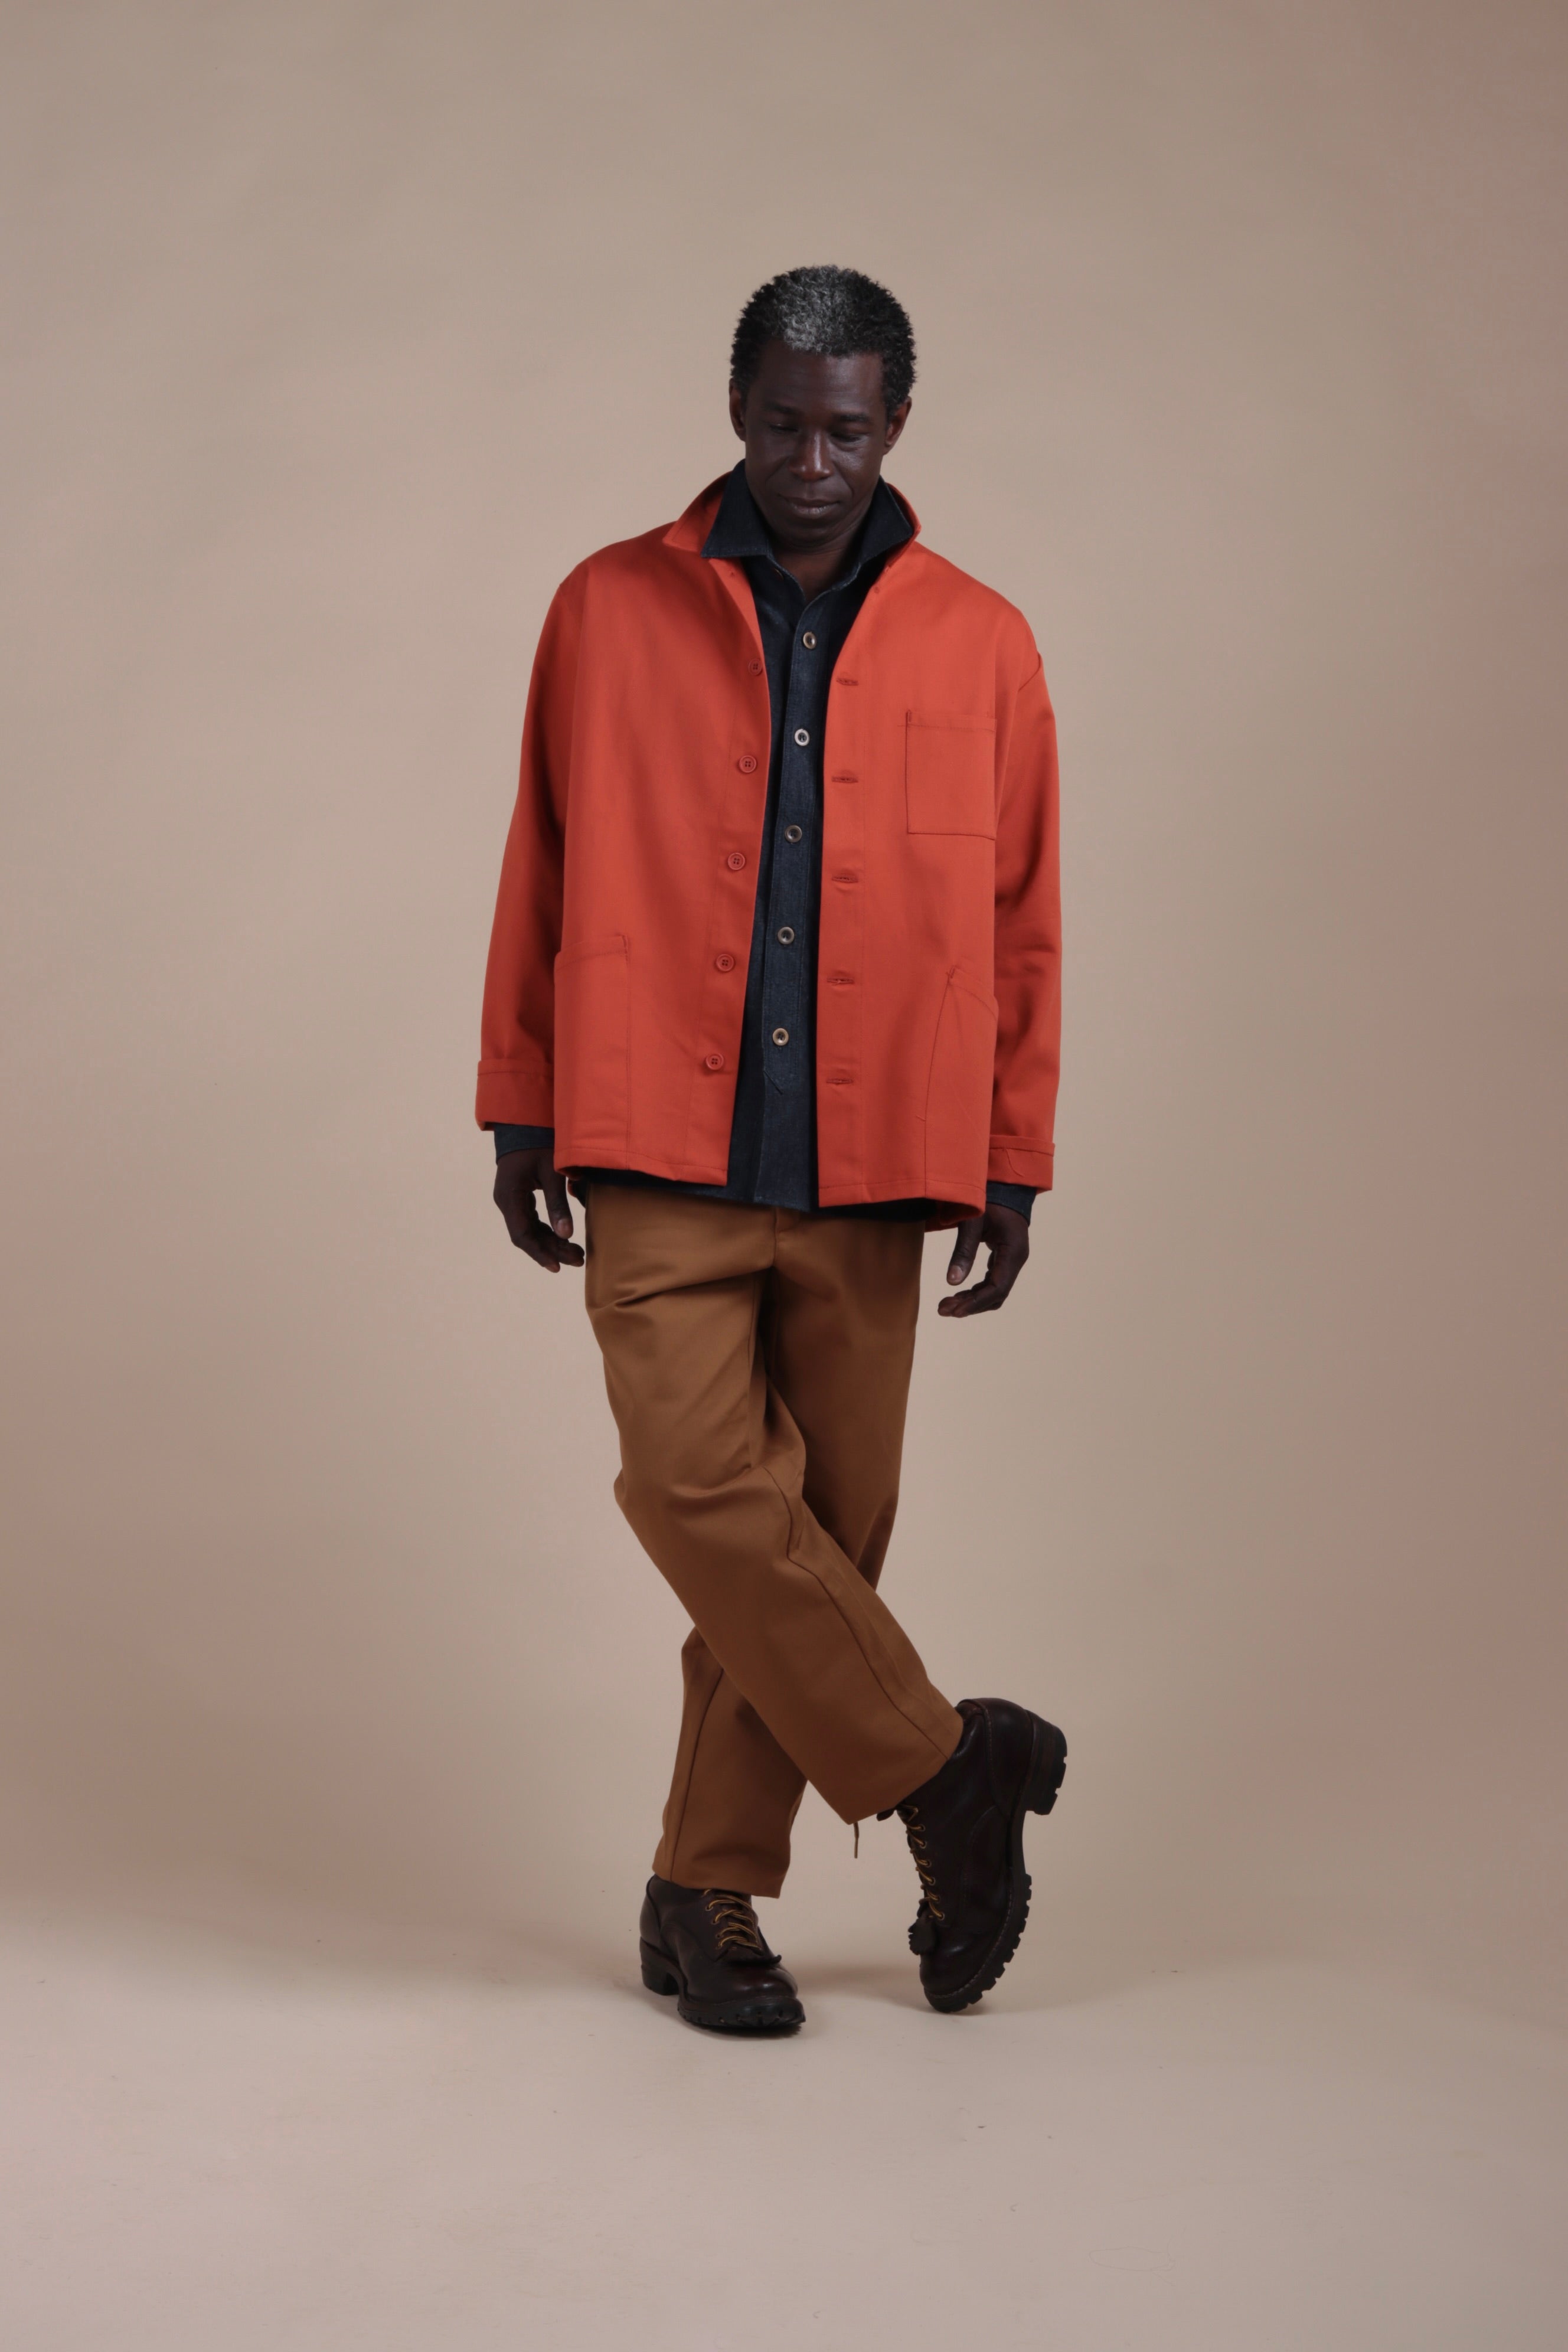 Man wears Carrier Company Norfolk Work Jacket in Orange with Denim Collar Shirt and Classic Trousers in Tan